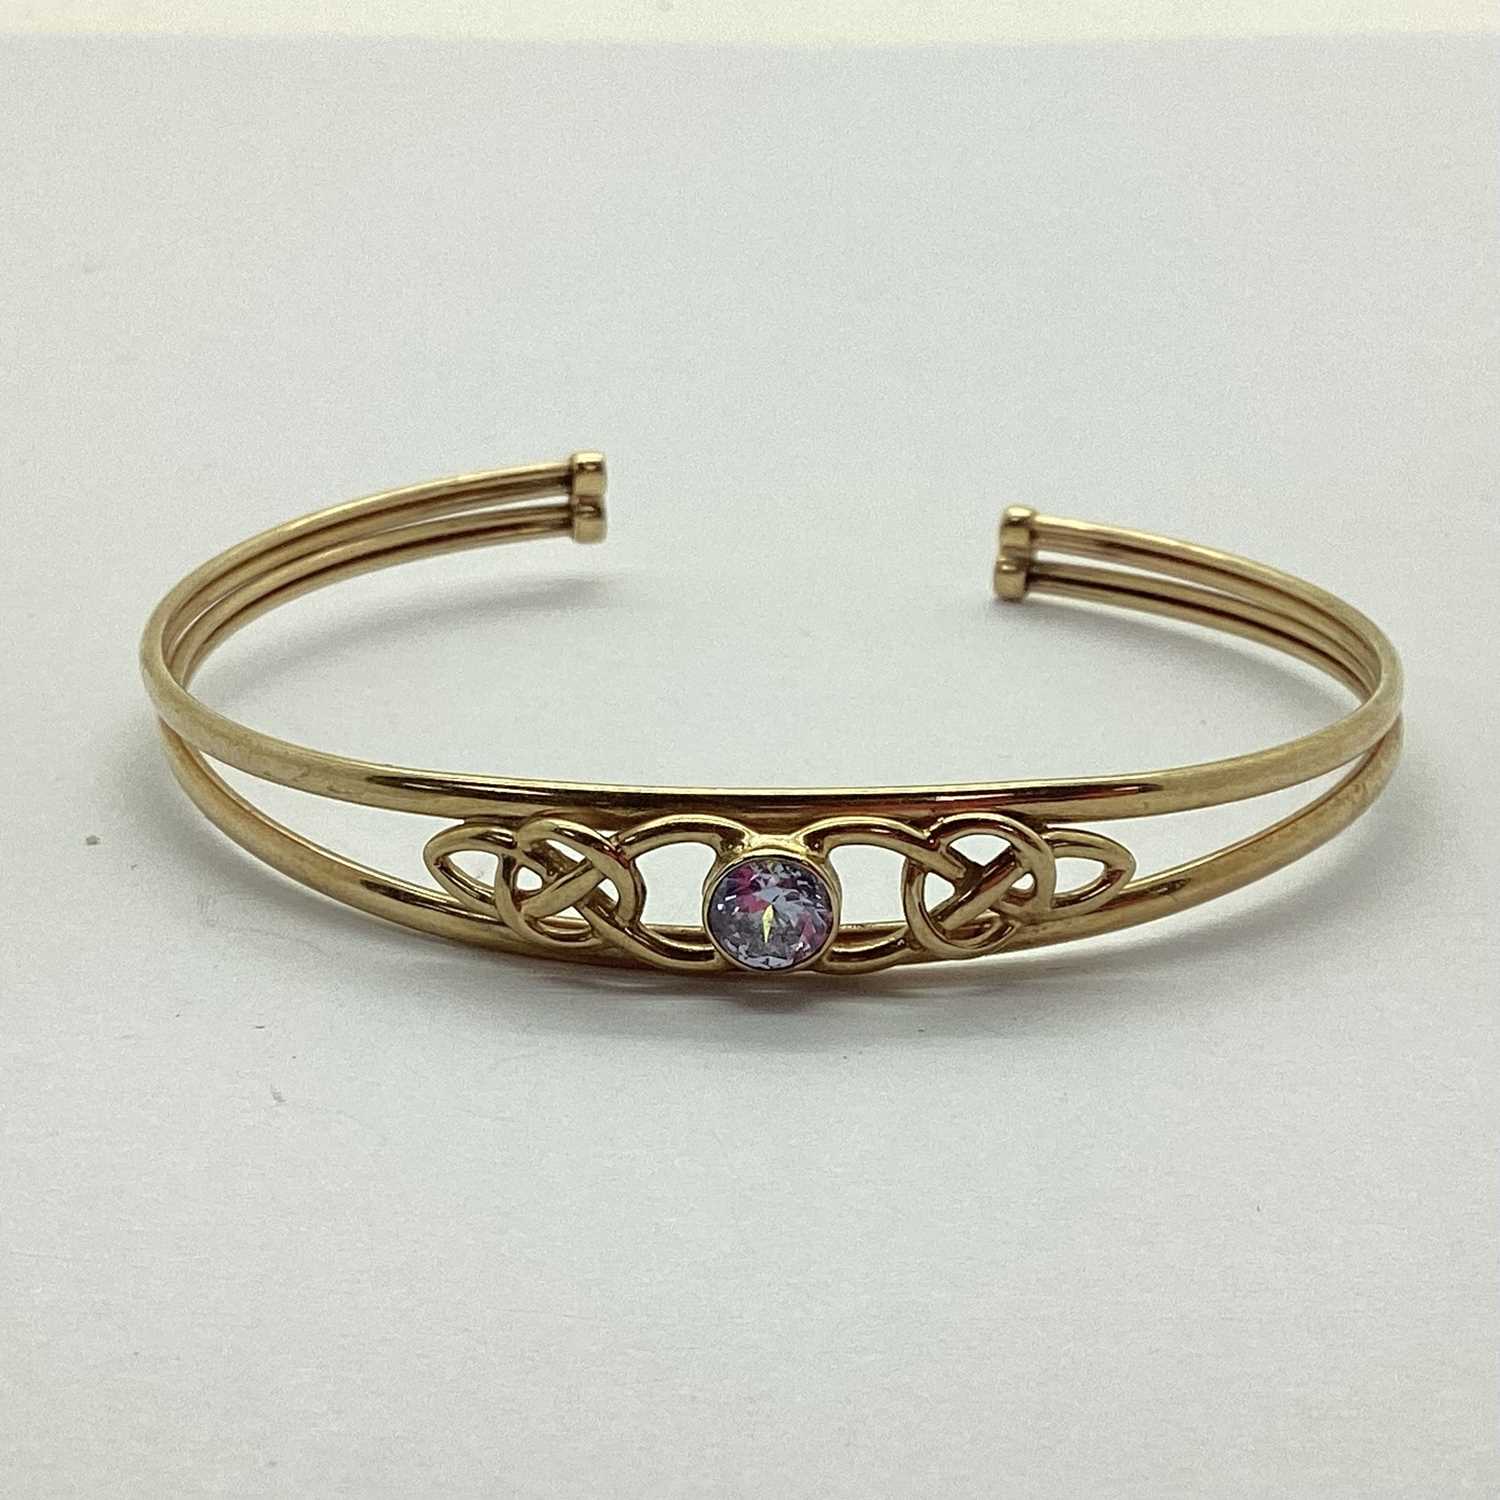 A Hallmarked 9ct Stone Set Bifuricated Bangle, the collet set stone, between Celtic knot style